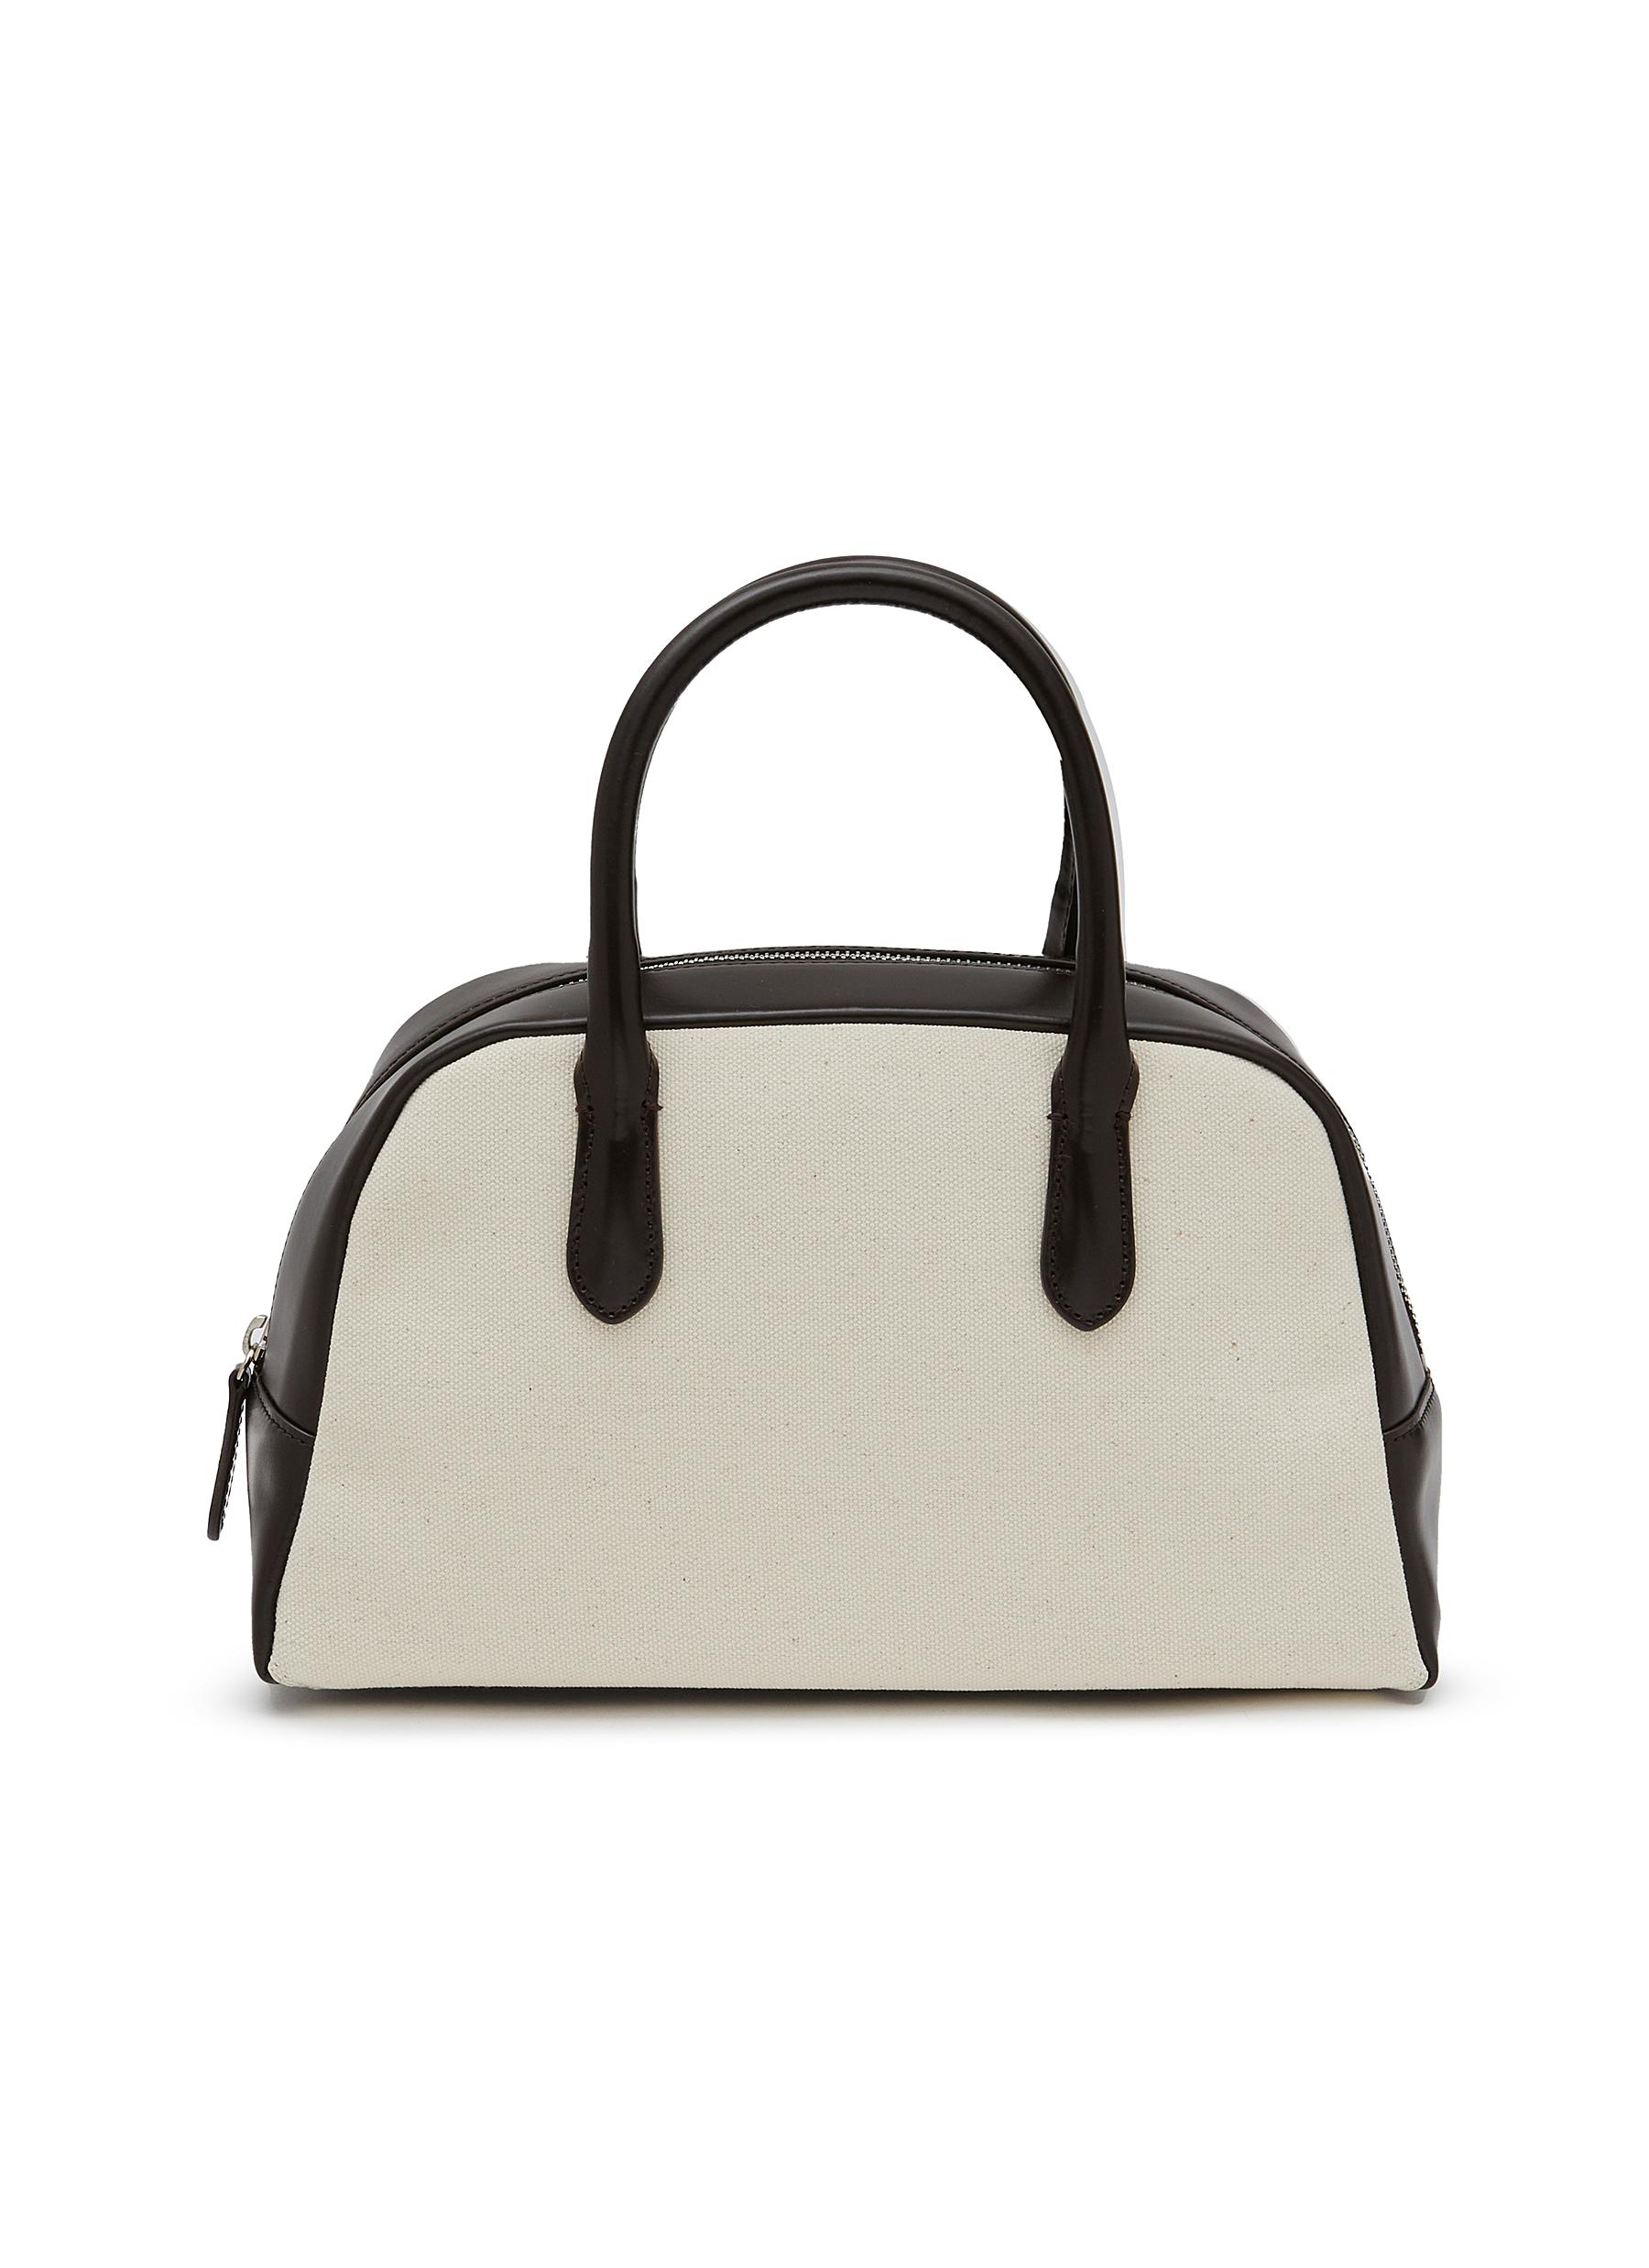 The Top Handle Leather Bag